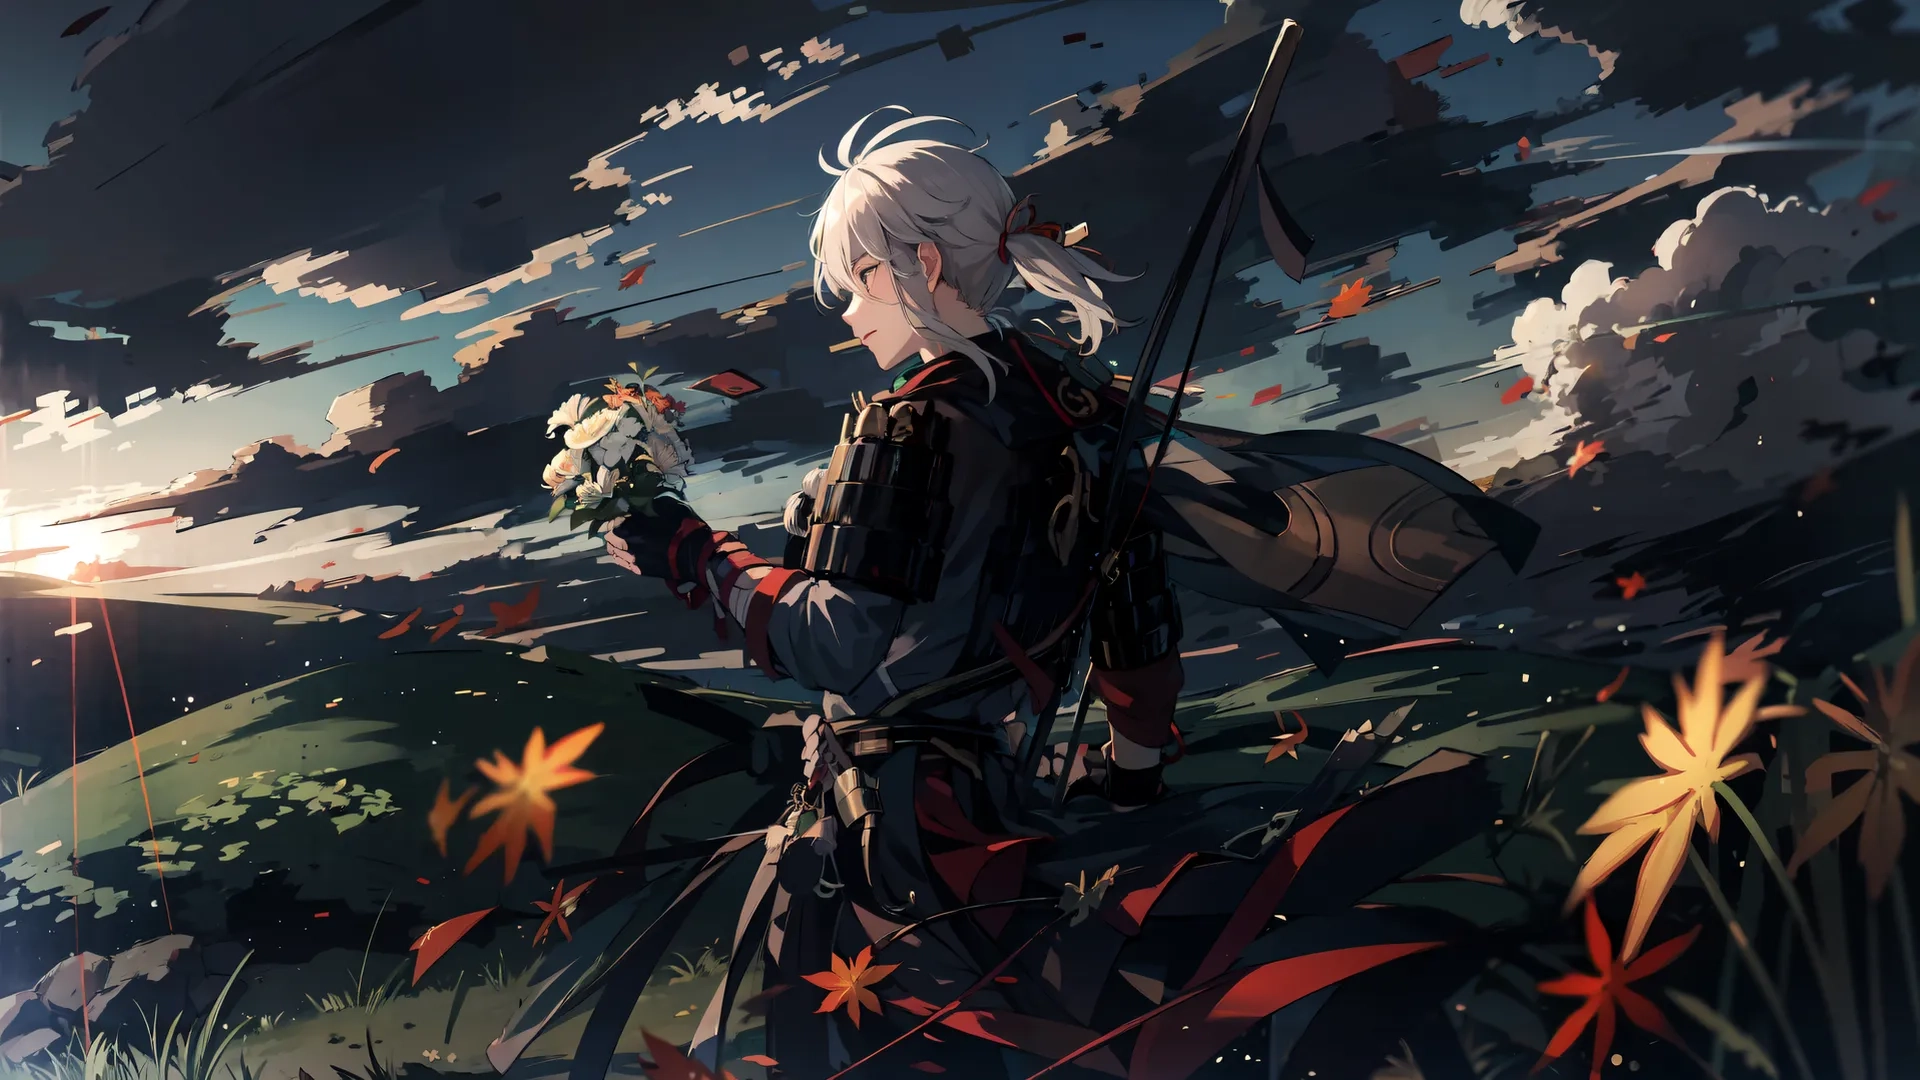 anime character with bow and arrows walking towards setting sun over field of flowers with arrow sticks and flowers in hand looking out to the left
